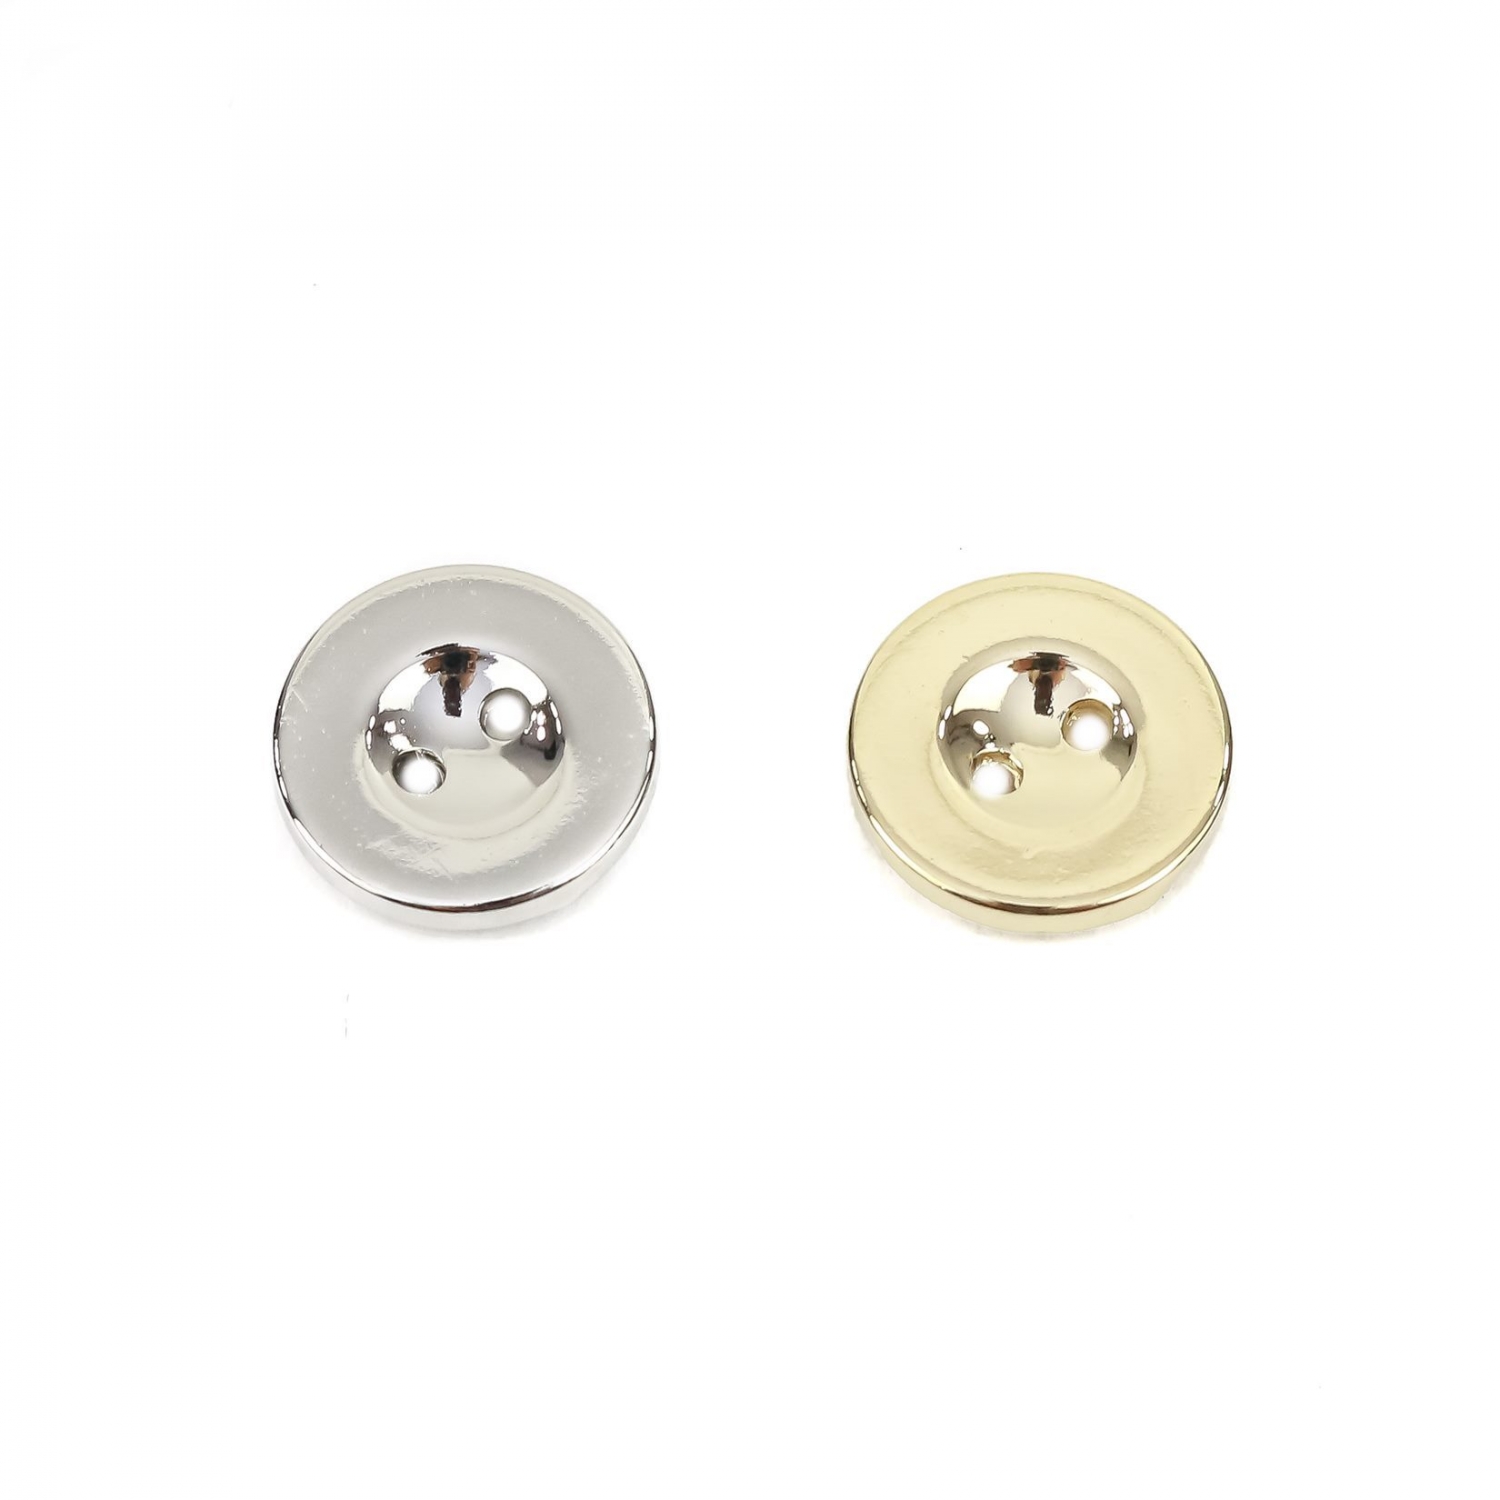 2 Holes Buttons, 11 mm (144 pcs/pack) Code: 2896/11